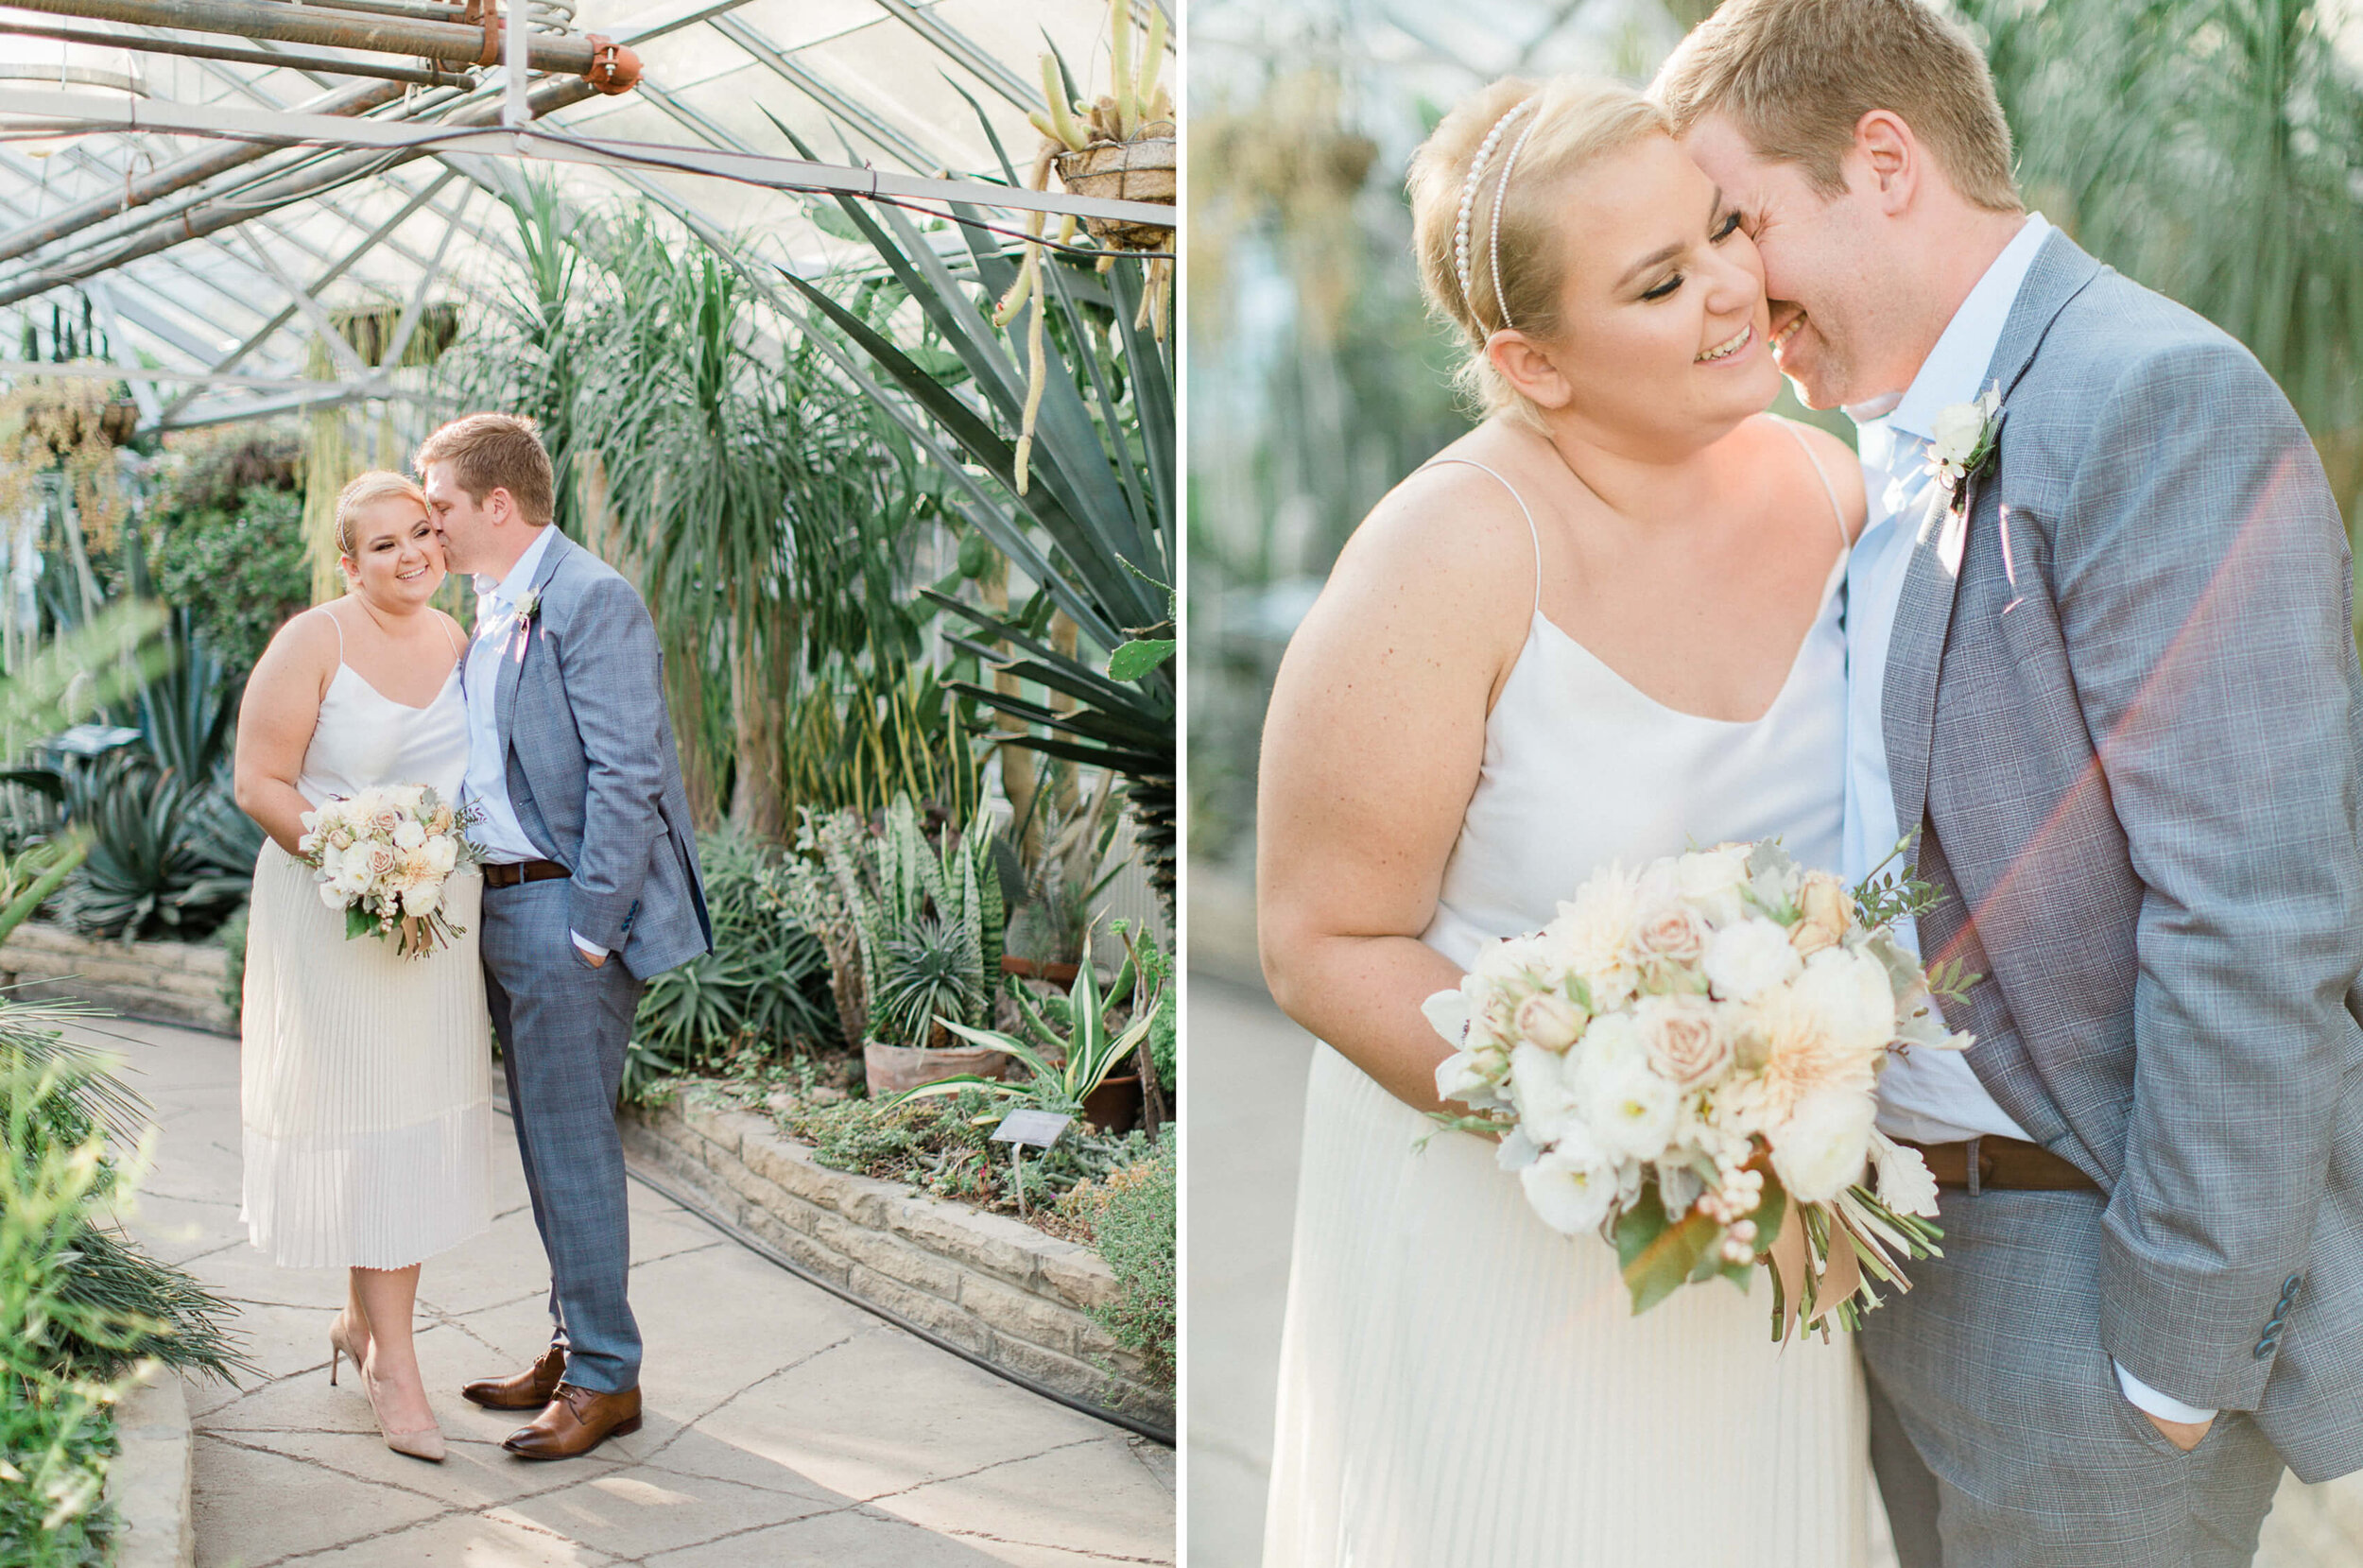 bride and groom posing naturally for candid wedding photographs at their intimate allen gardens elopement